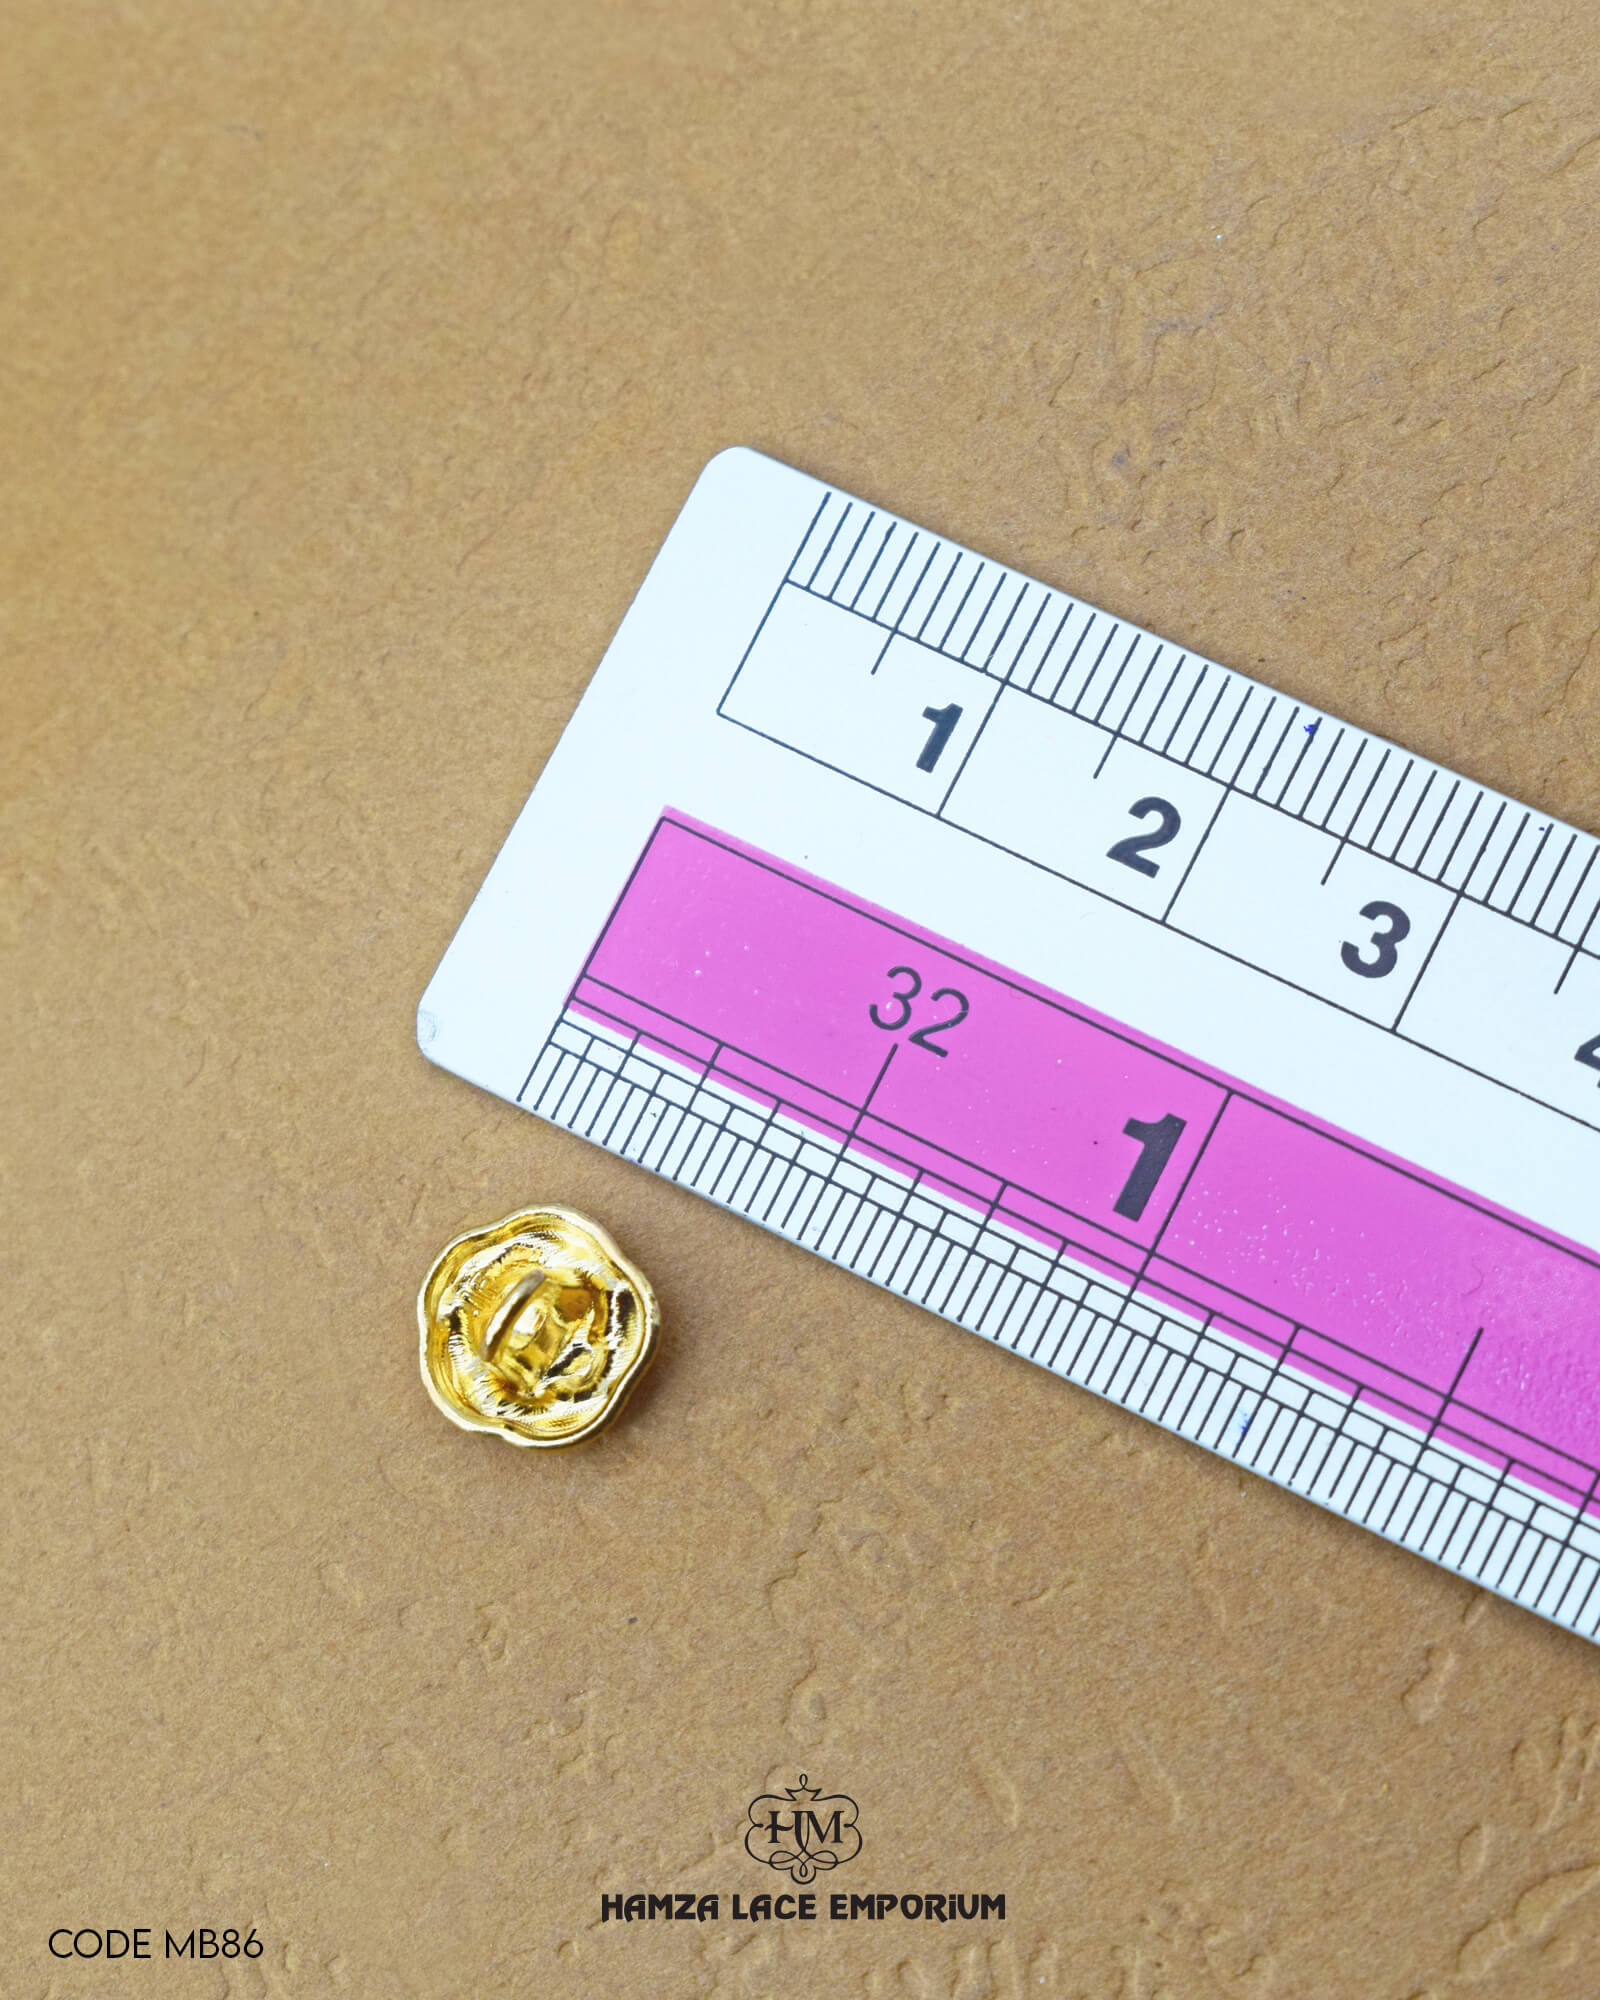 Size of the 'Flower Design Button MB86' is given with the help of a ruler